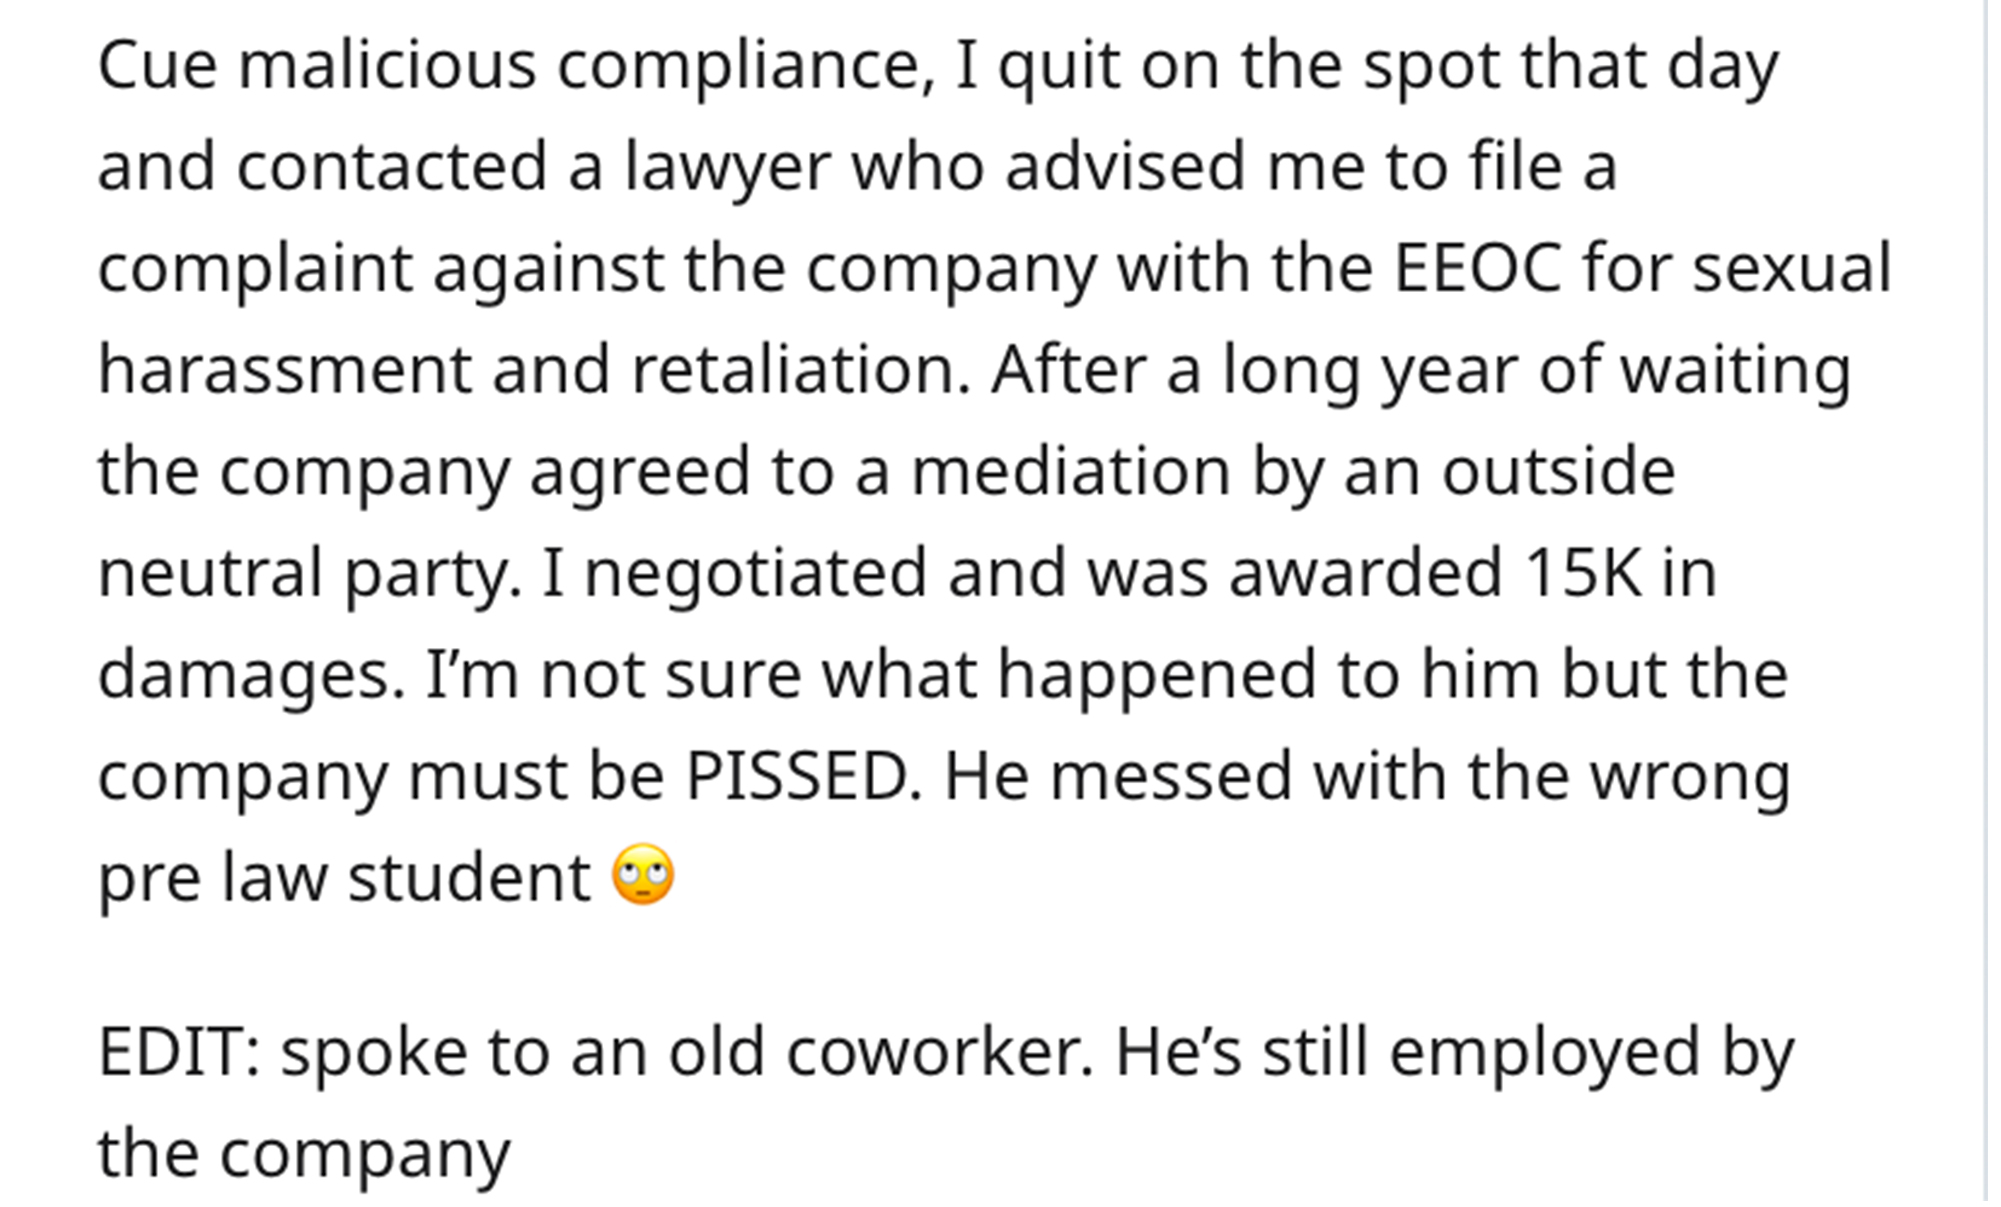 employee sues boss story - Radio Télé Métronome - Cue malicious compliance, I quit on the spot that day and contacted a lawyer who advised me to file a complaint against the company with the Eeoc for sexual harassment and retaliation. After a long year of